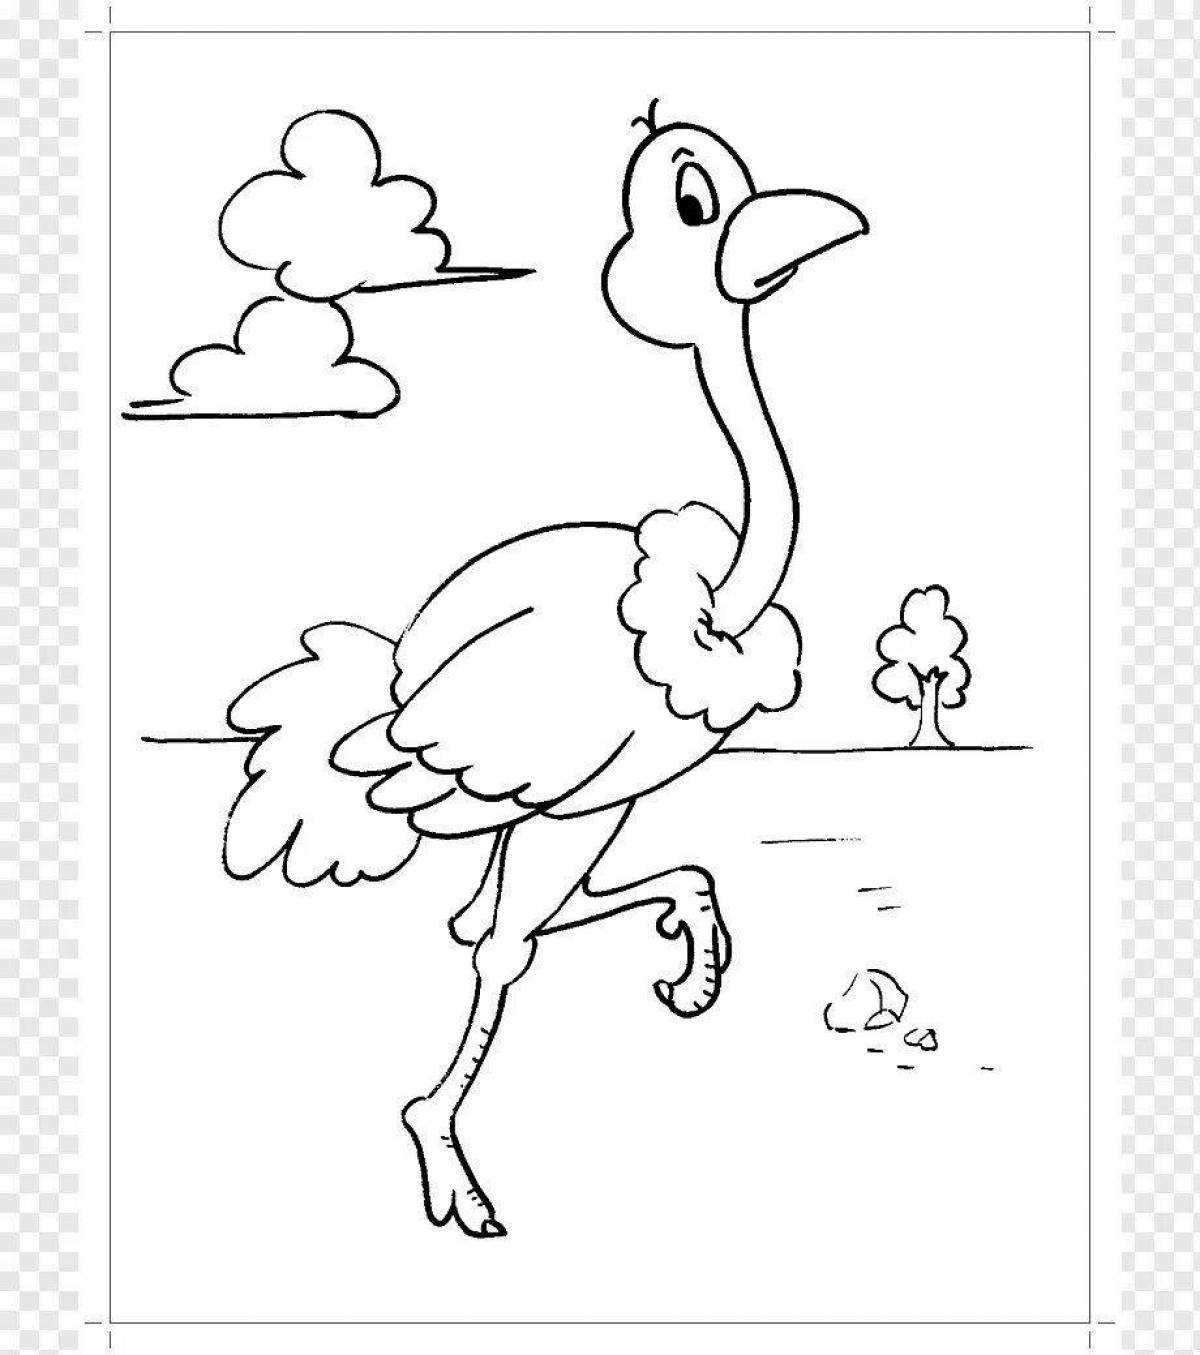 Incredible ostrich coloring book for kids